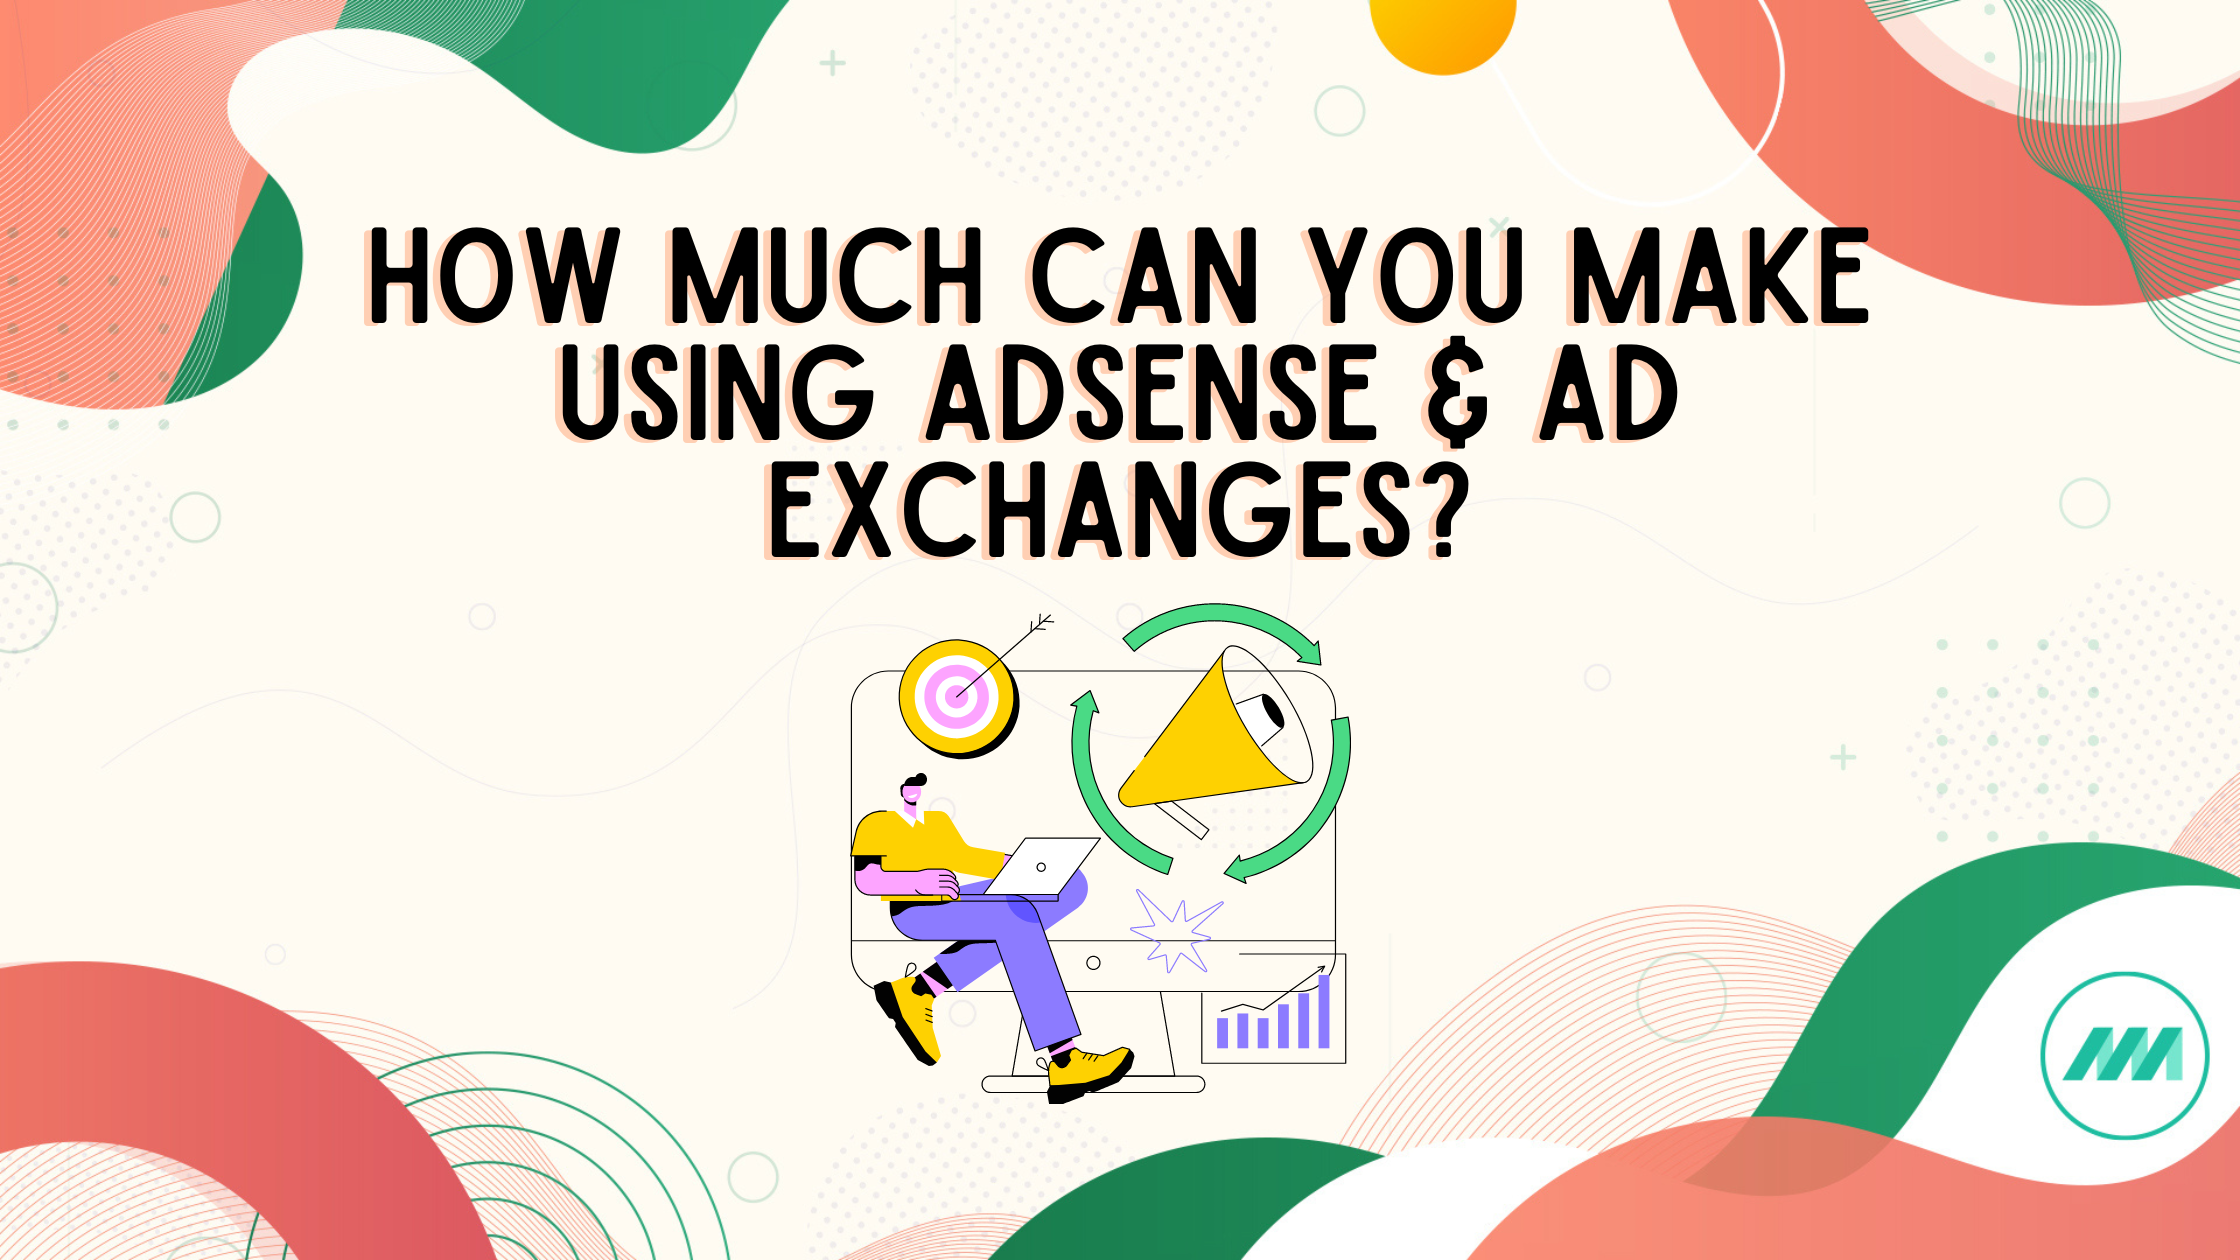 yarn sad beans How Much Can You Make Using Adsense & Ad Exchanges? - Newor Media Blog